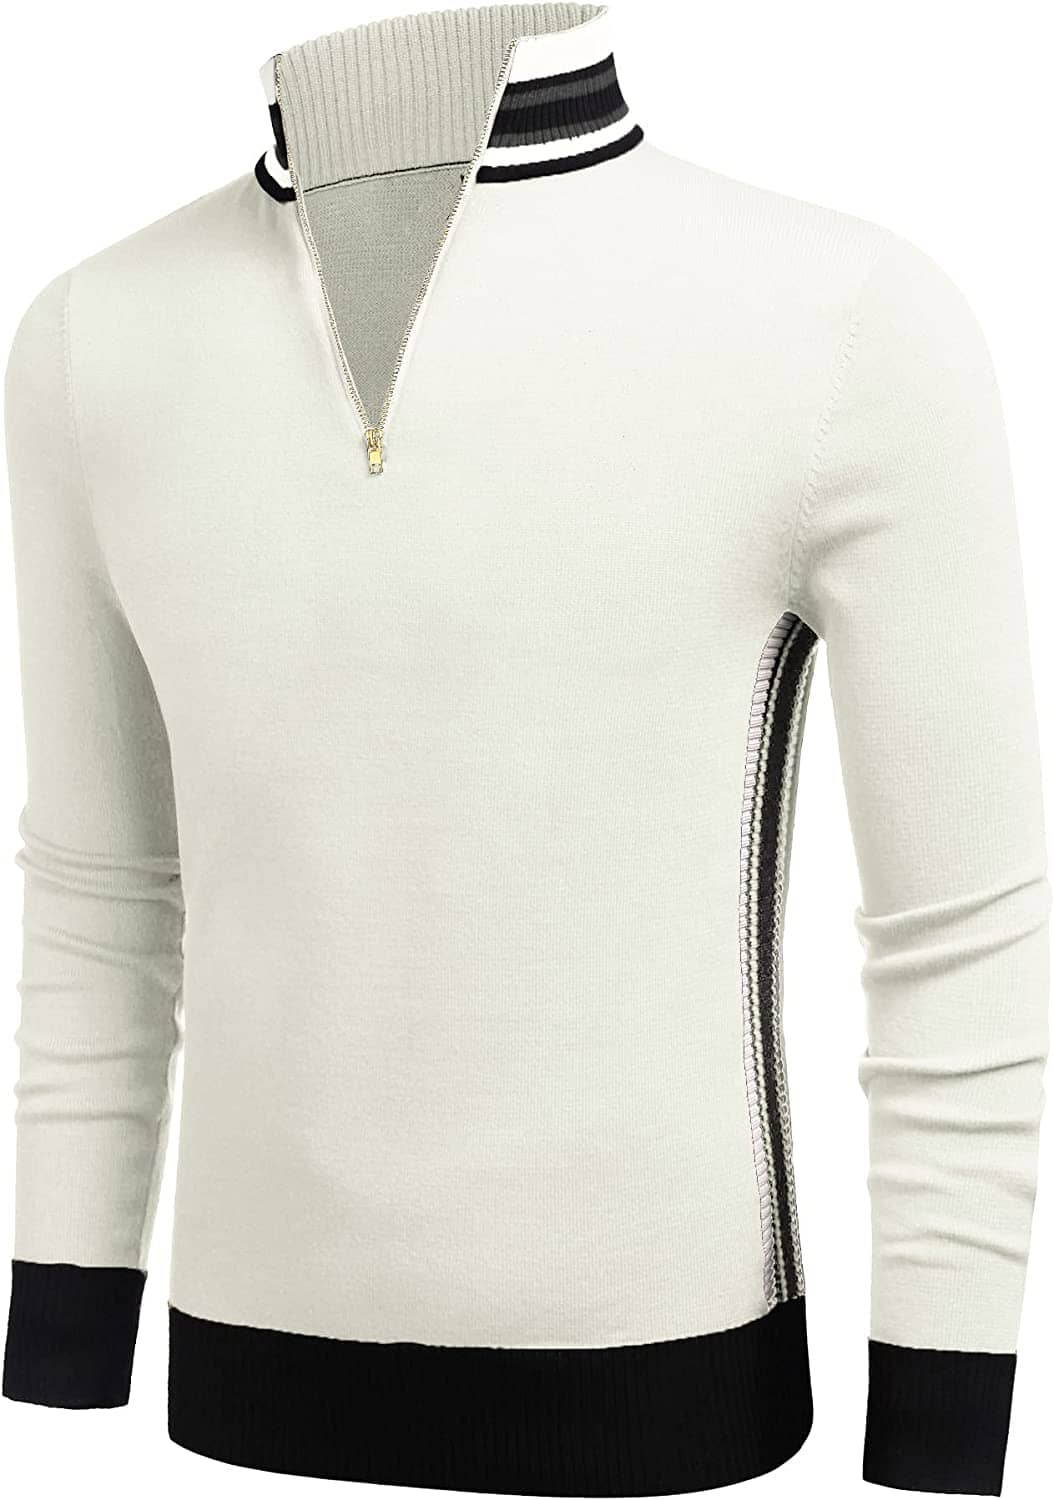 Striped Collar Pullover Sweater (US Only) Sweaters COOFANDY Store White S 